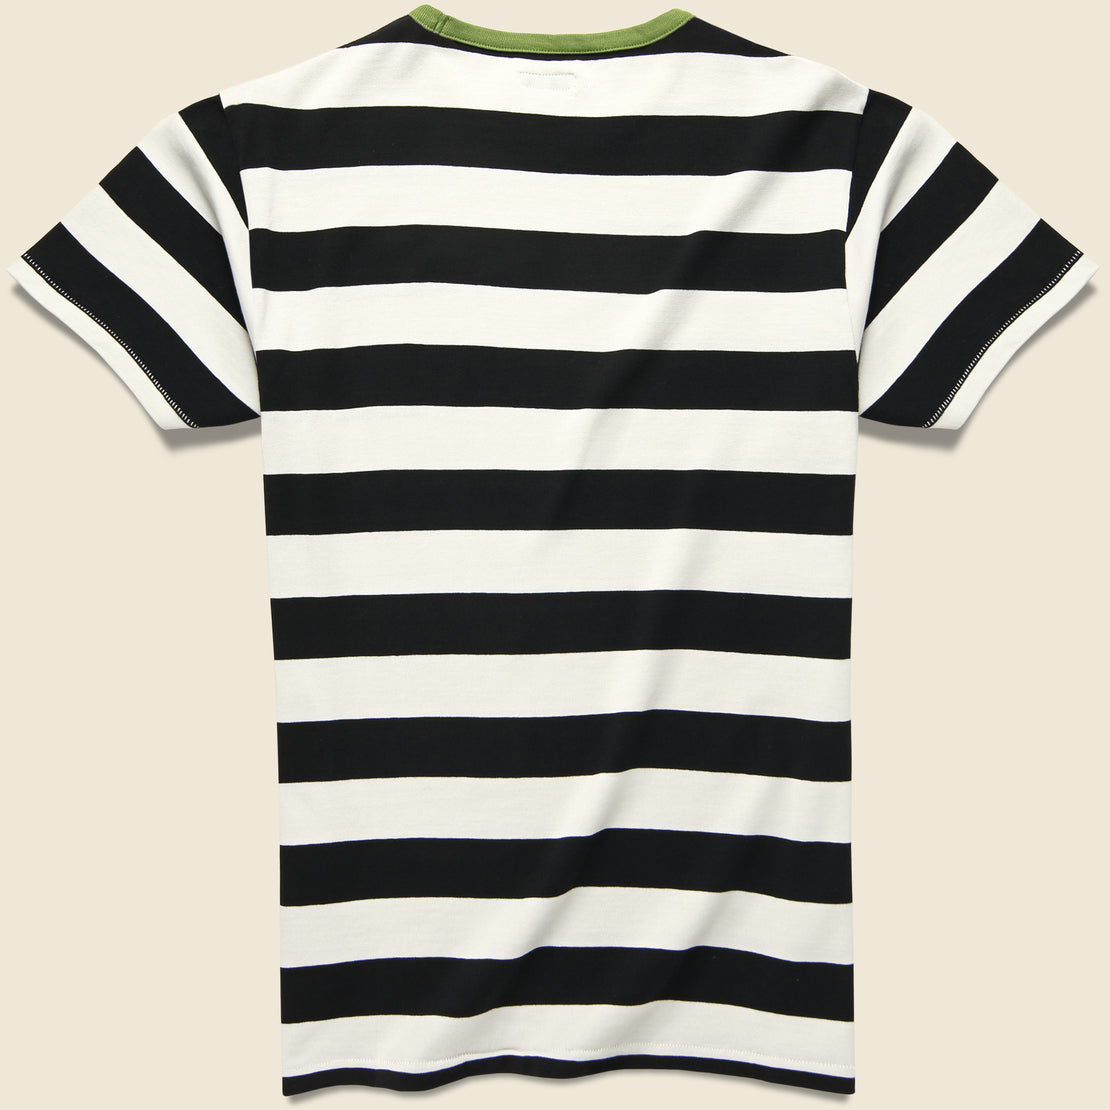 Mojave Striped Tee - White/Black - Knickerbocker - STAG Provisions - Tops - S/S Tee